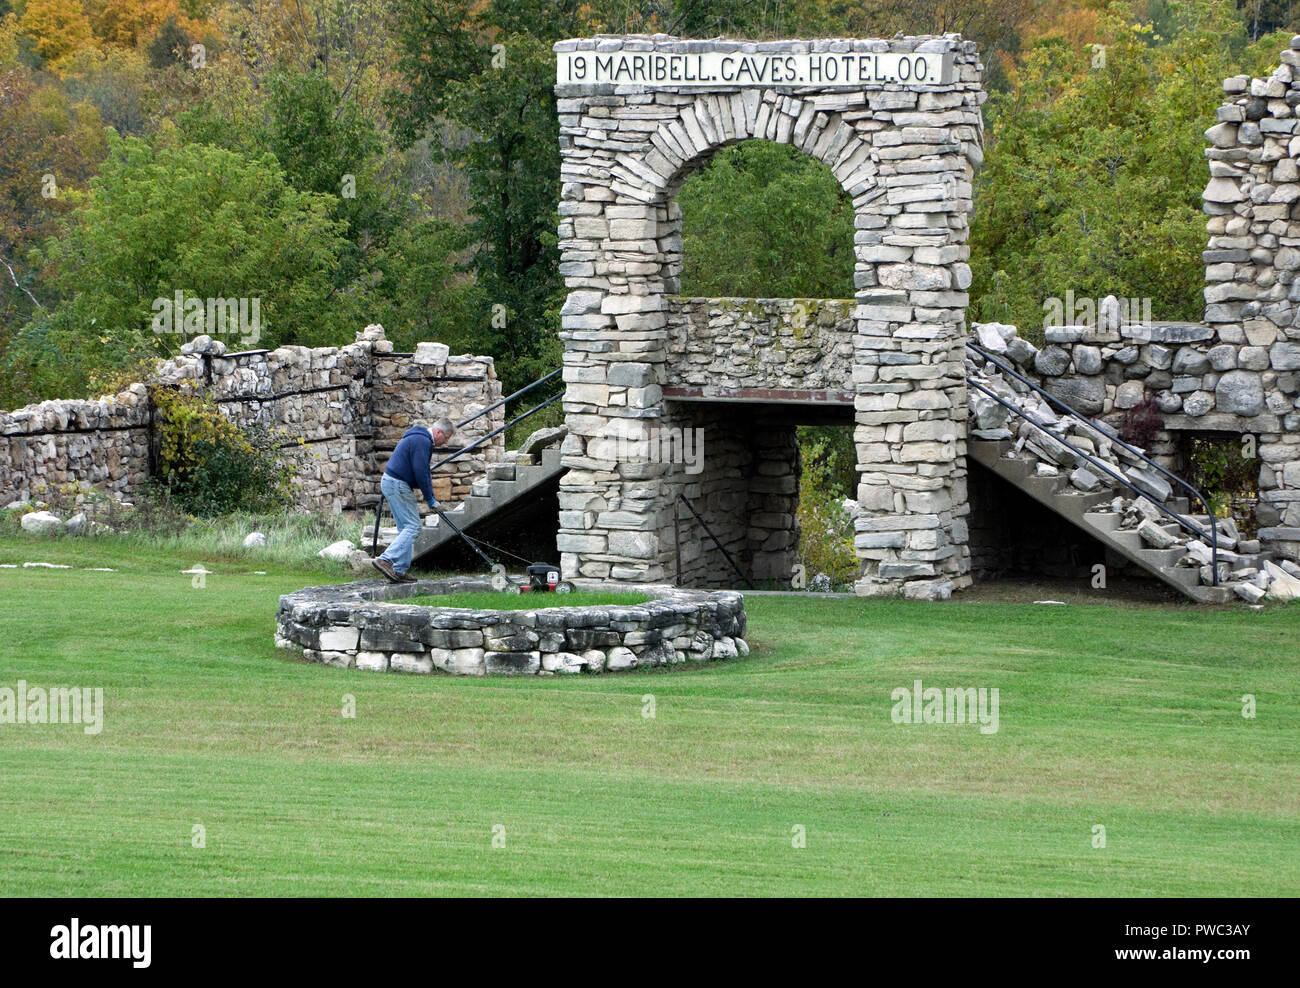 Caretaker mowing grass in circular fountain foundation in front of ruins of historic Maribel Hotel Stock Photo